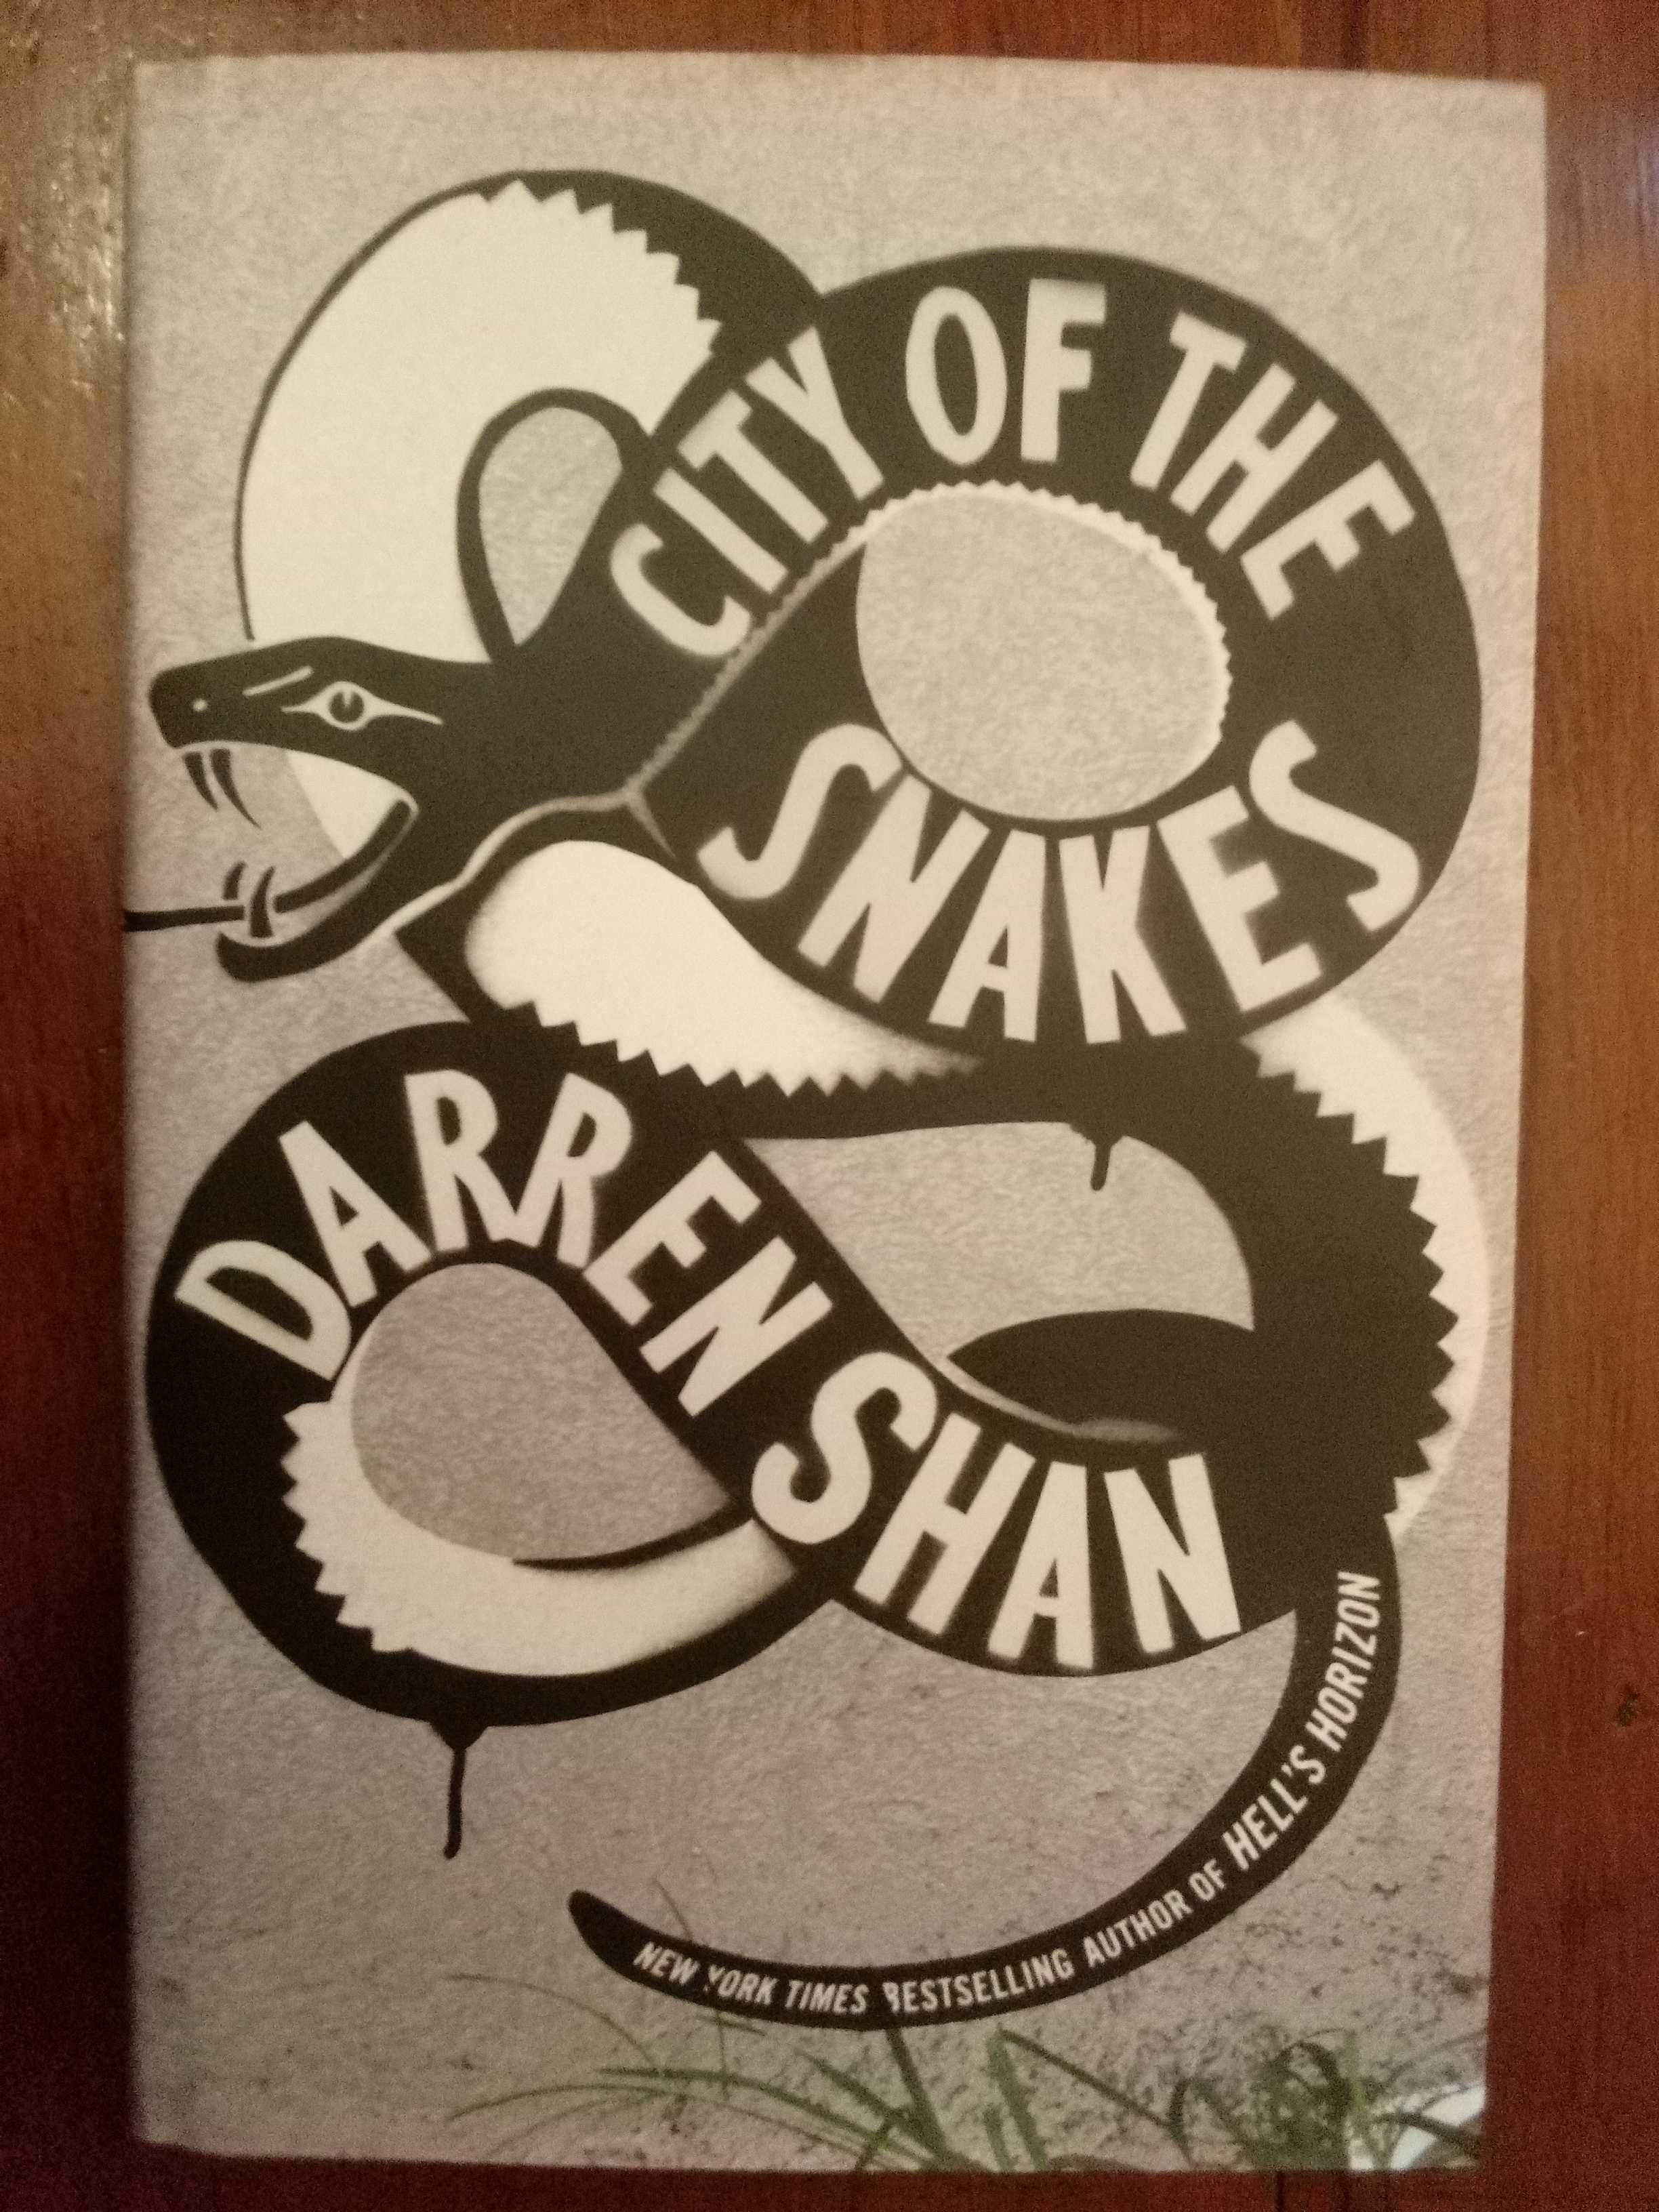 Darren Shan - City of the snakes, The City, book three